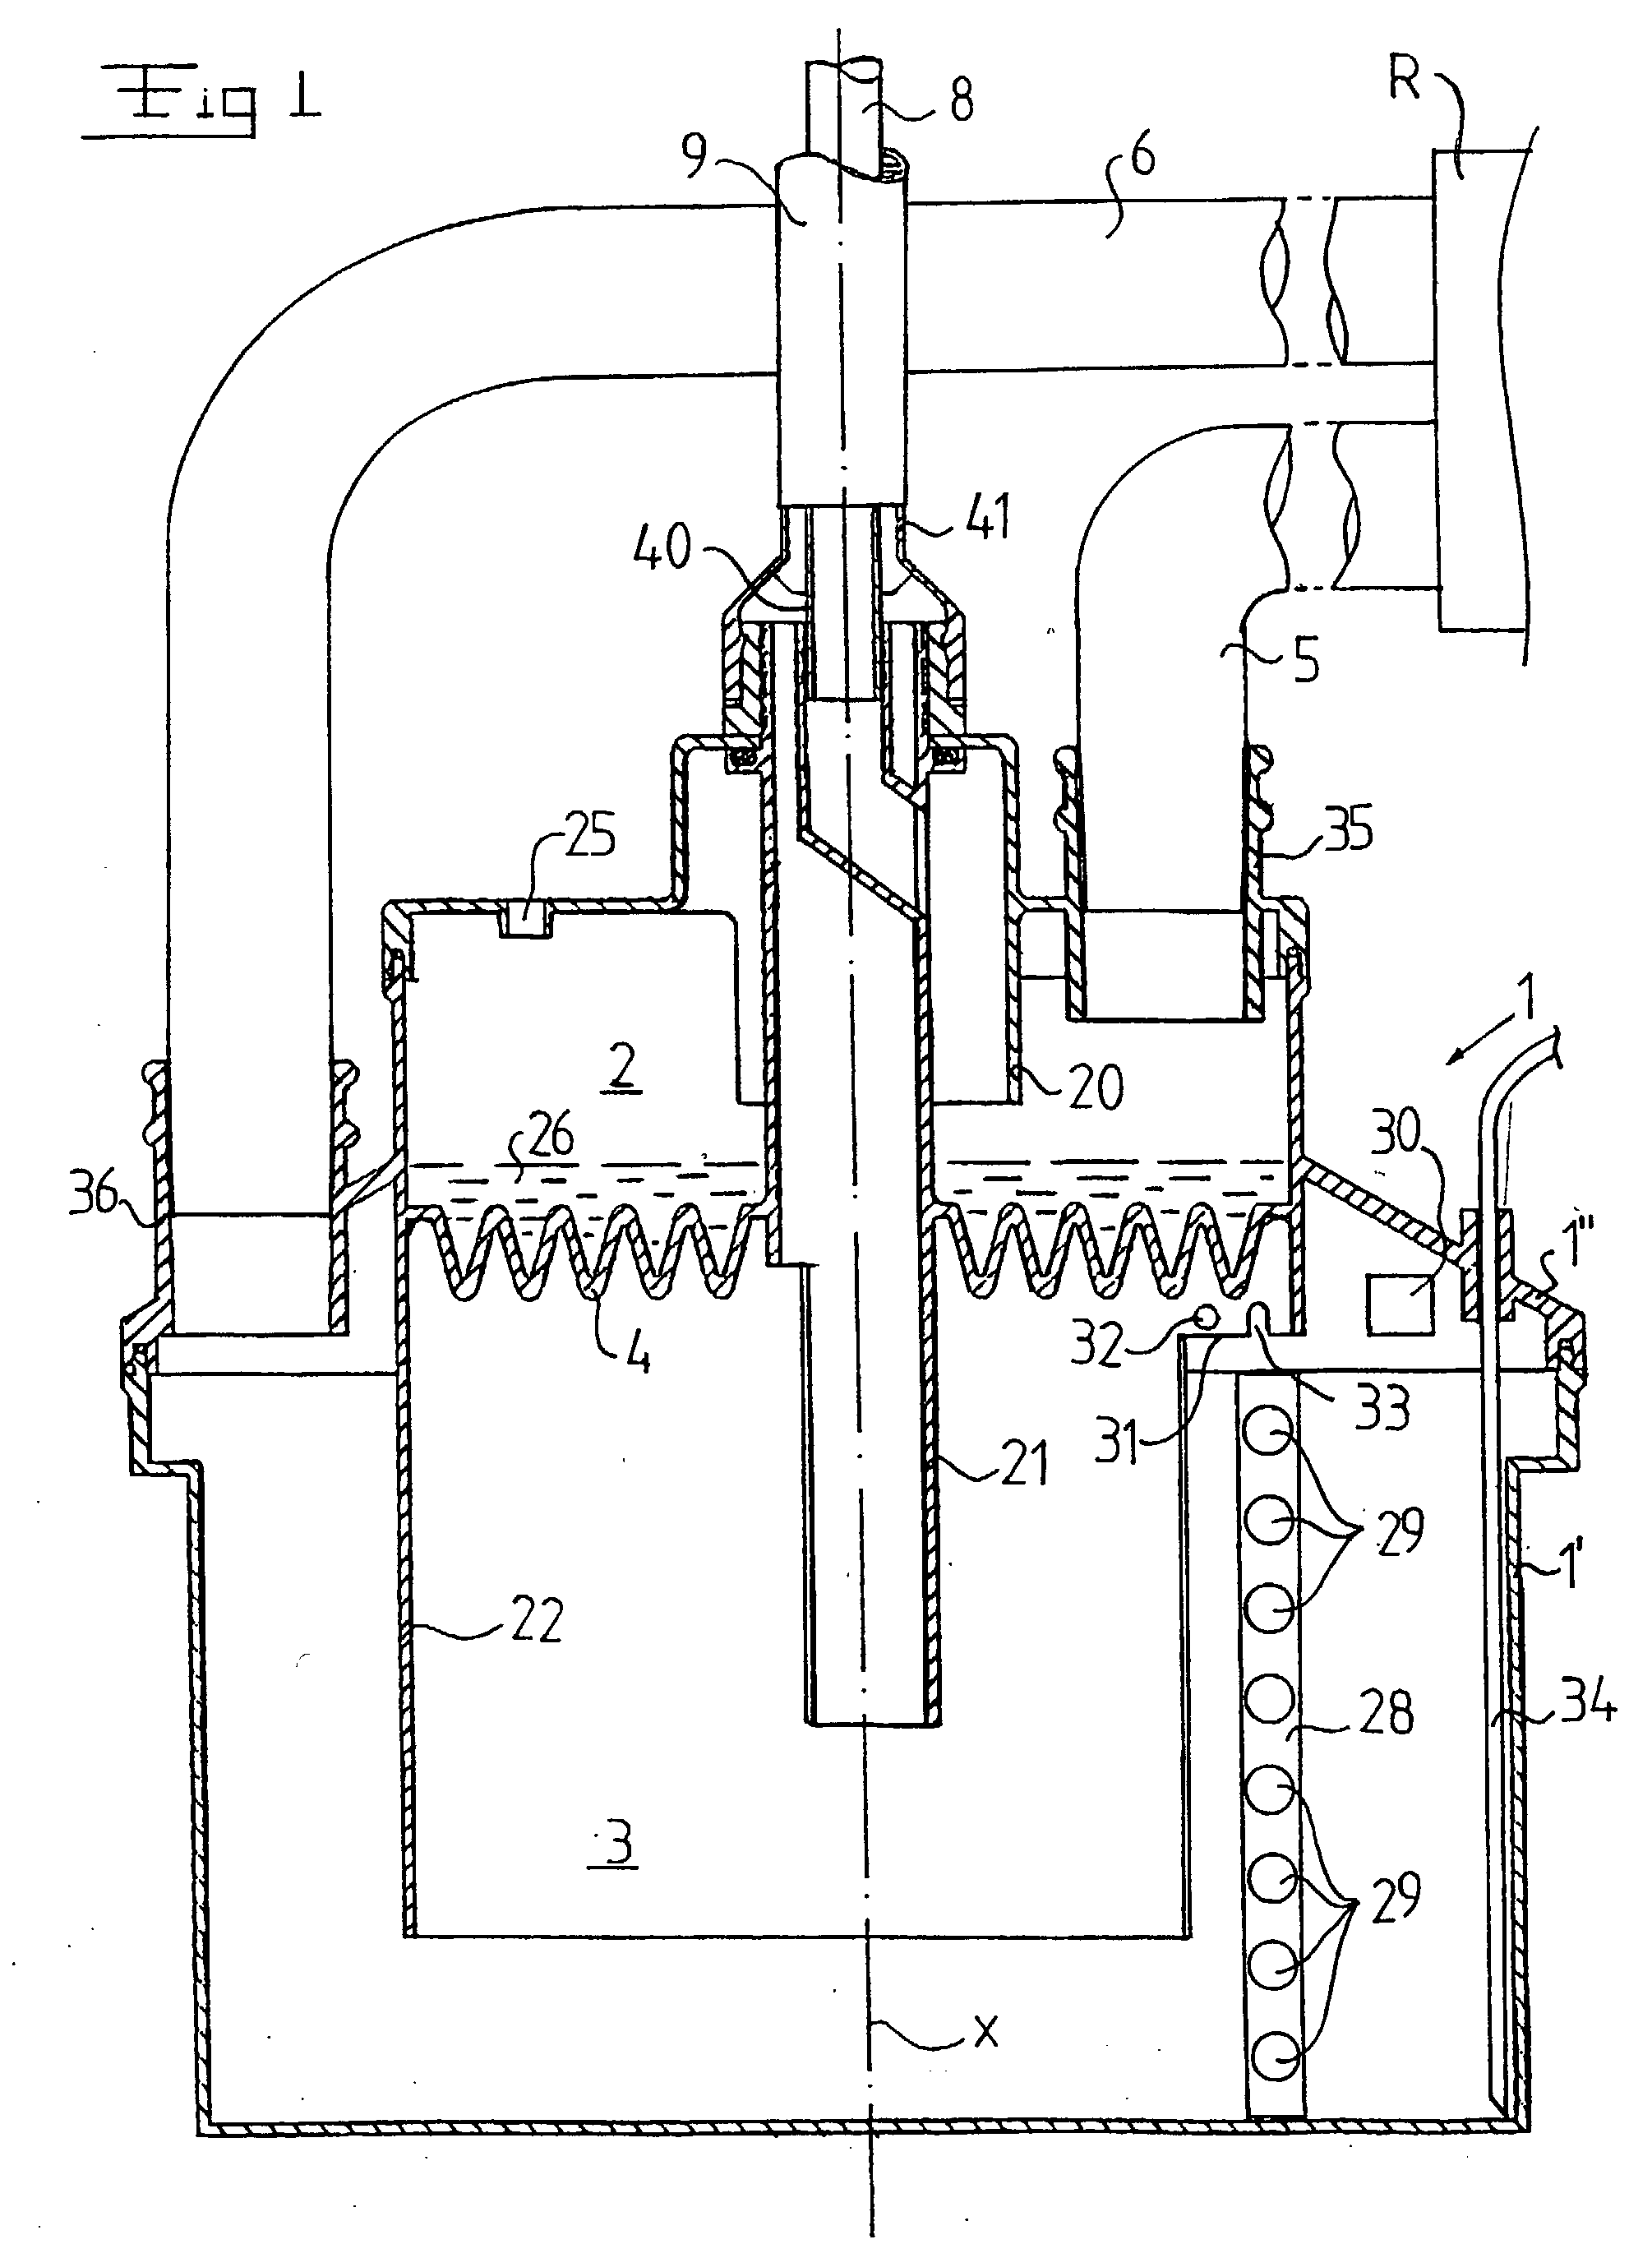 Device for collecting liquid from exhalation gas from a patient